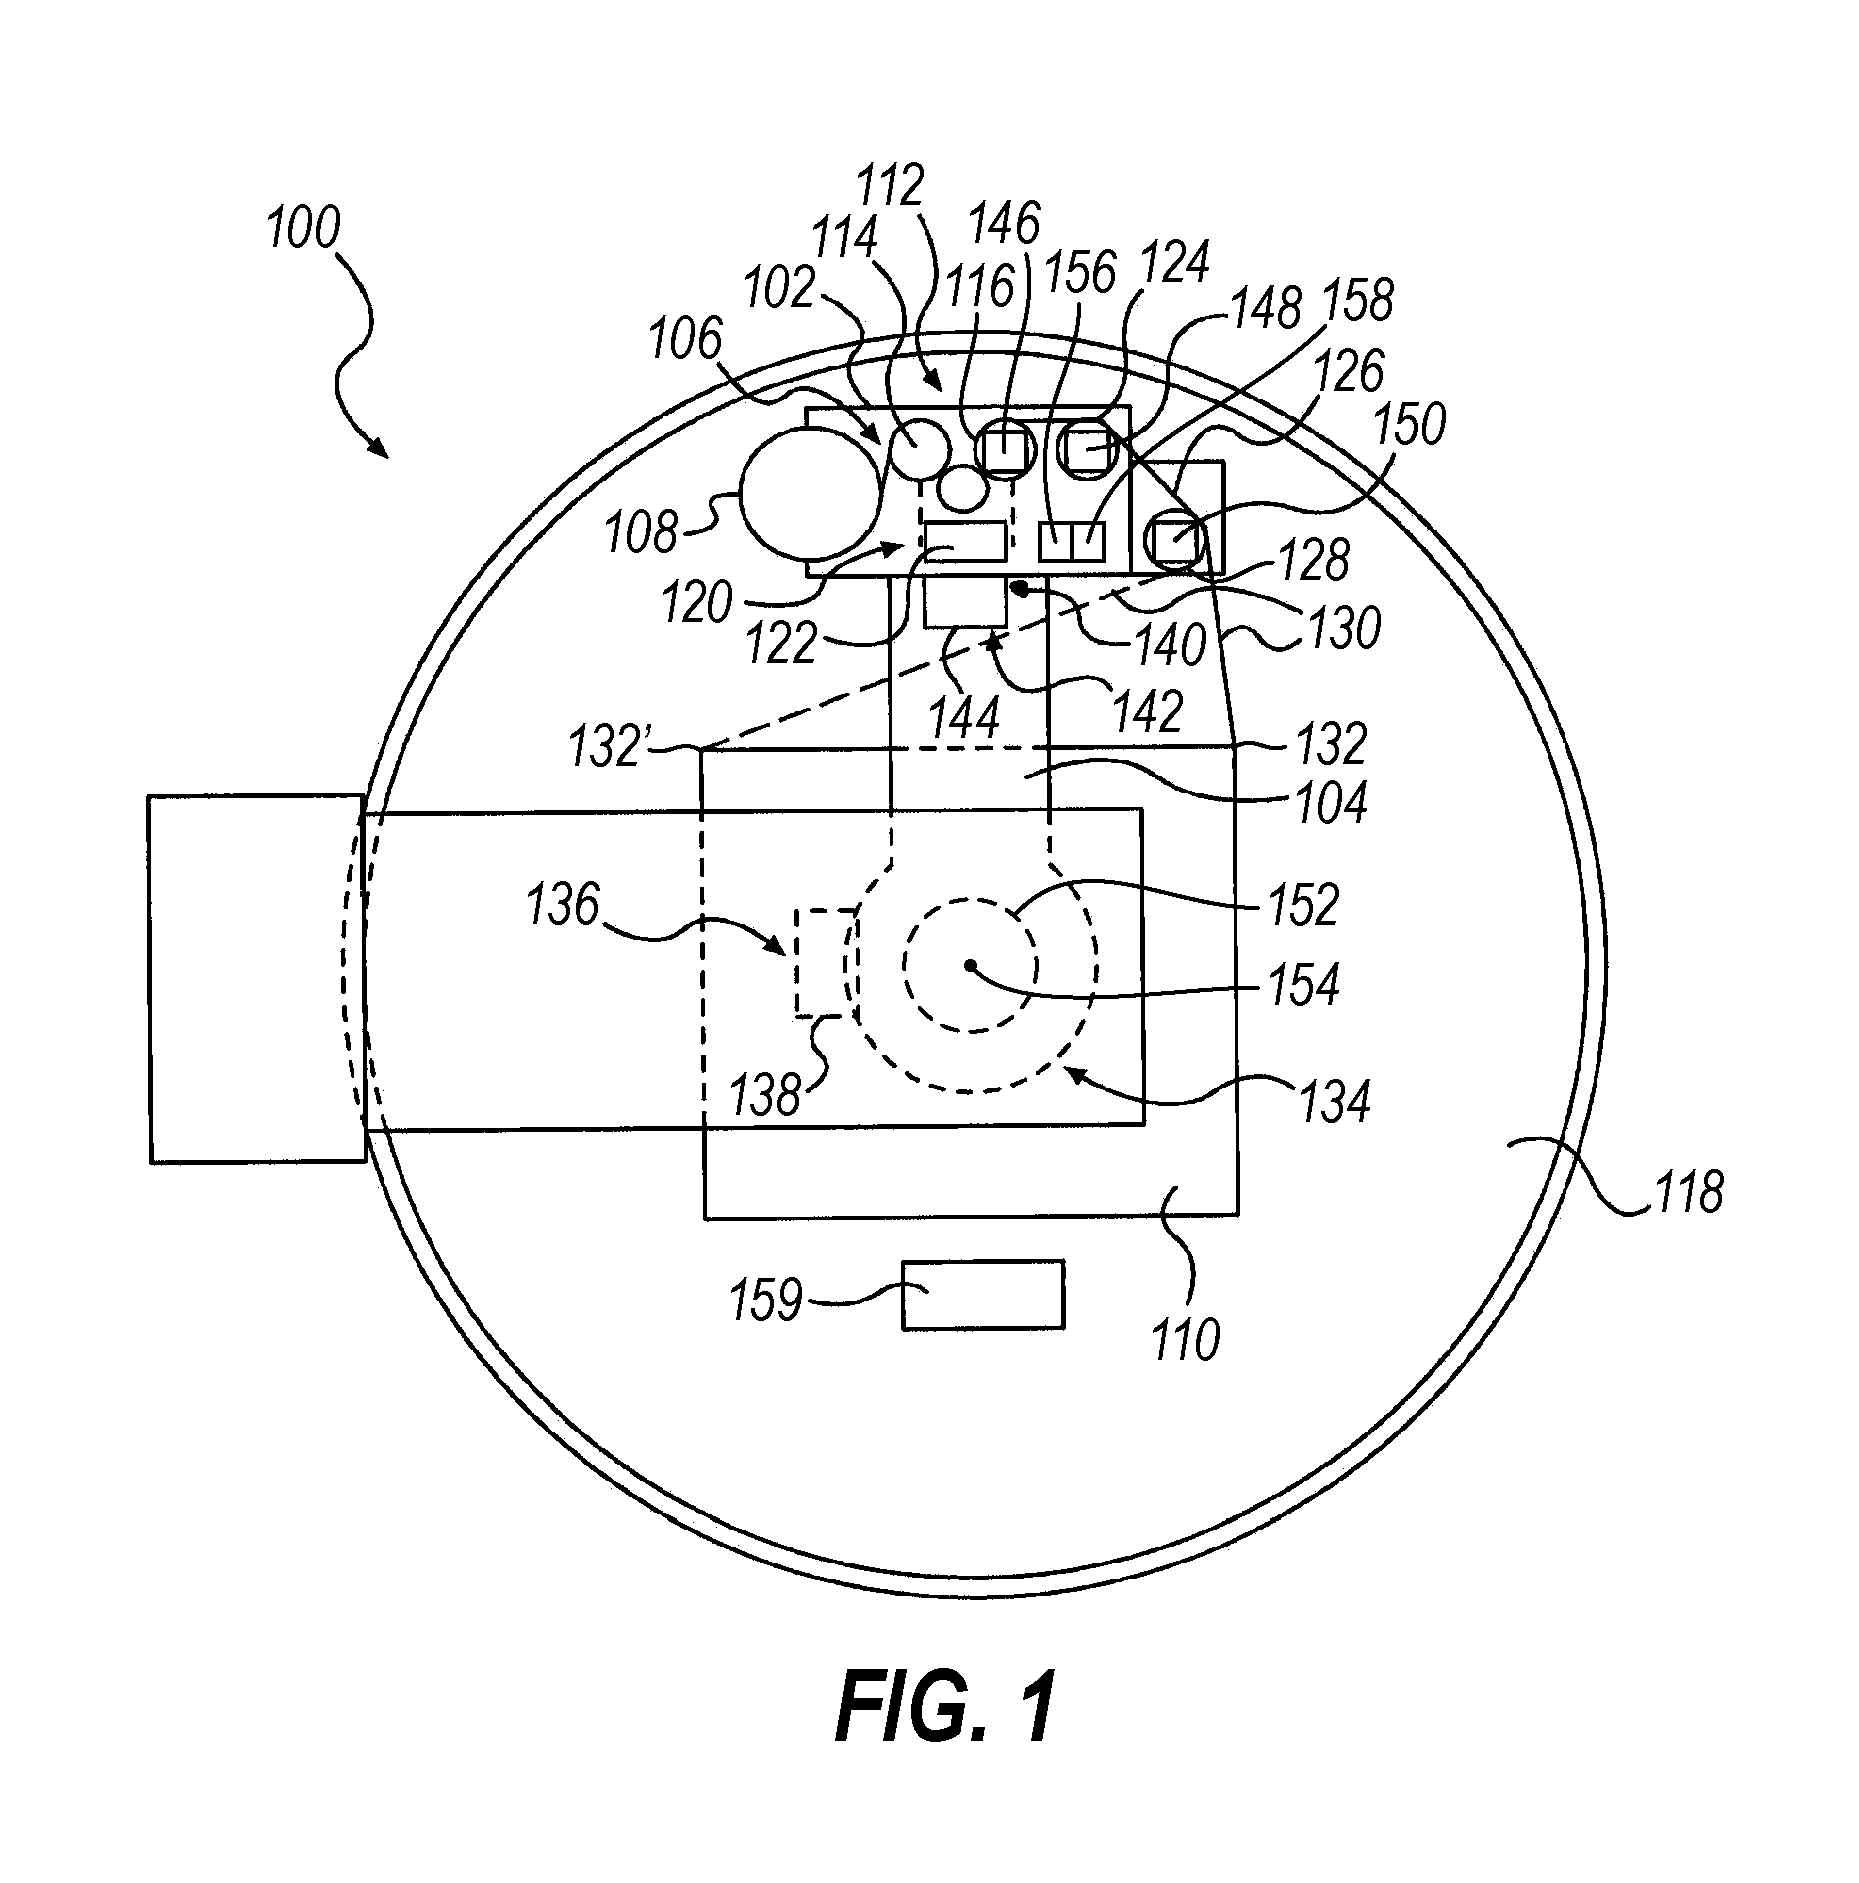 Dynamic Adjustment of Wrap Force Parameter Responsive to Monitored Wrap Force and/or For Film Break Reduction